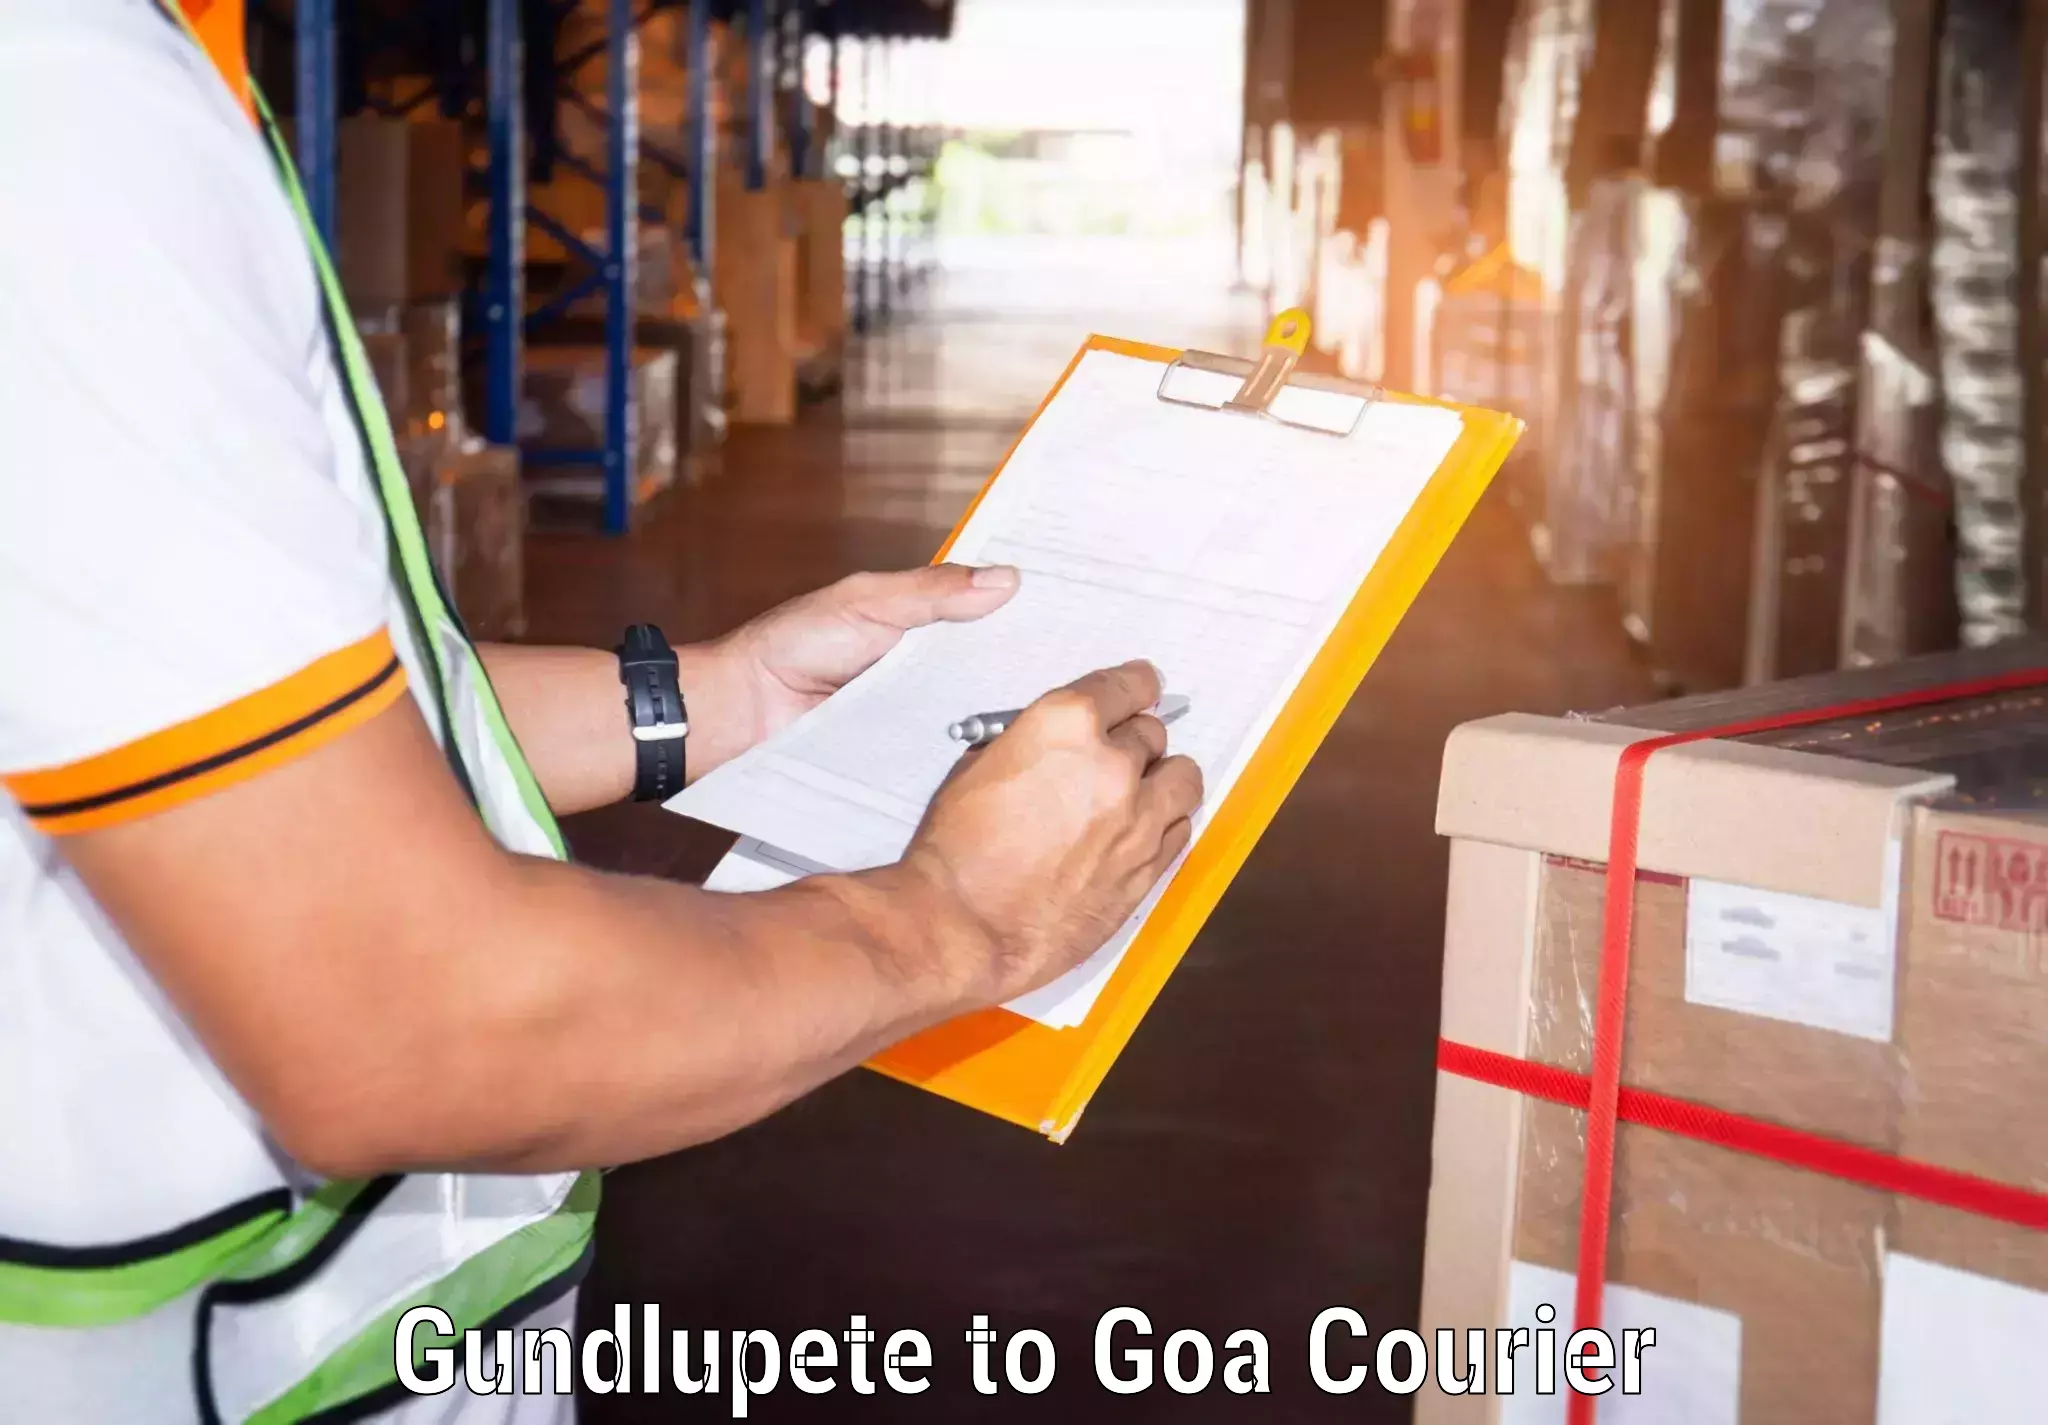 Business delivery service Gundlupete to Goa University